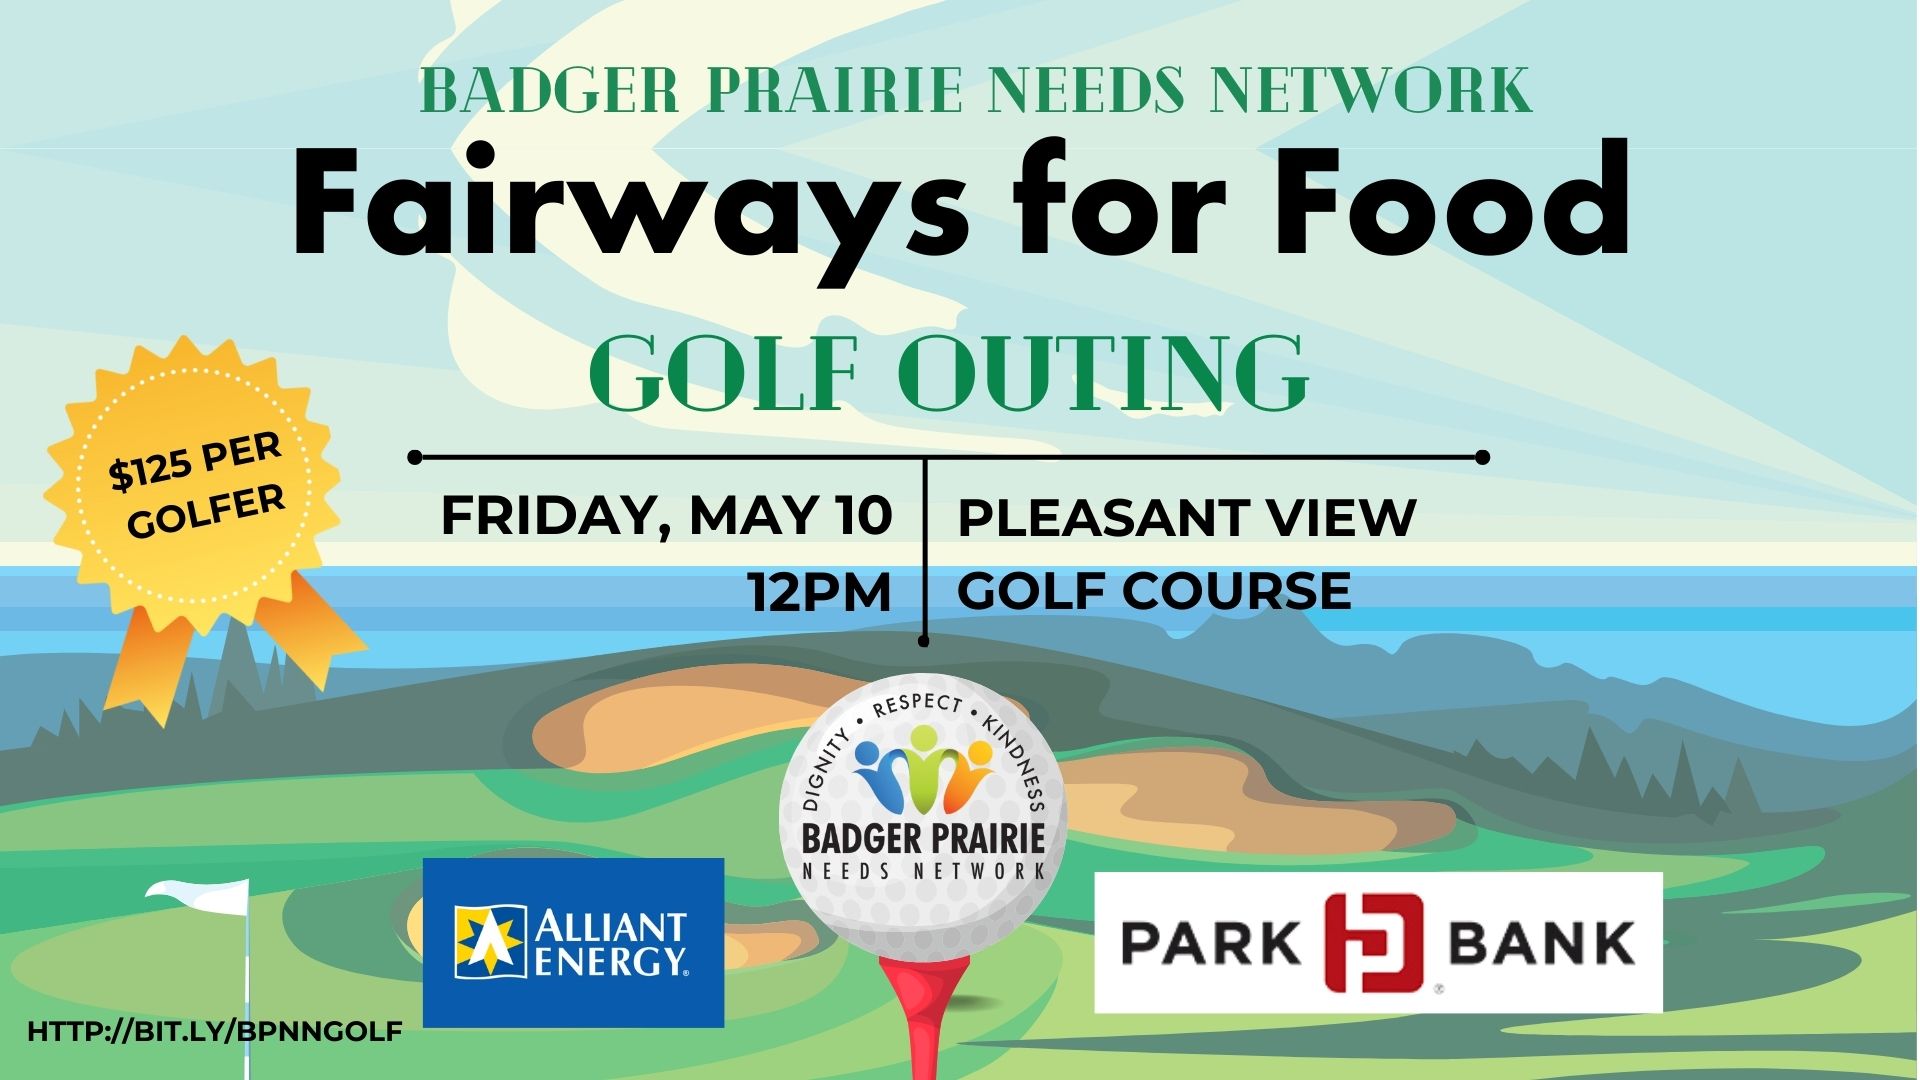 Promotional poster for badger prairie needs network's "fairways for food" golf outing event at pleasant view golf course, listing details including date, time, and sponsors.